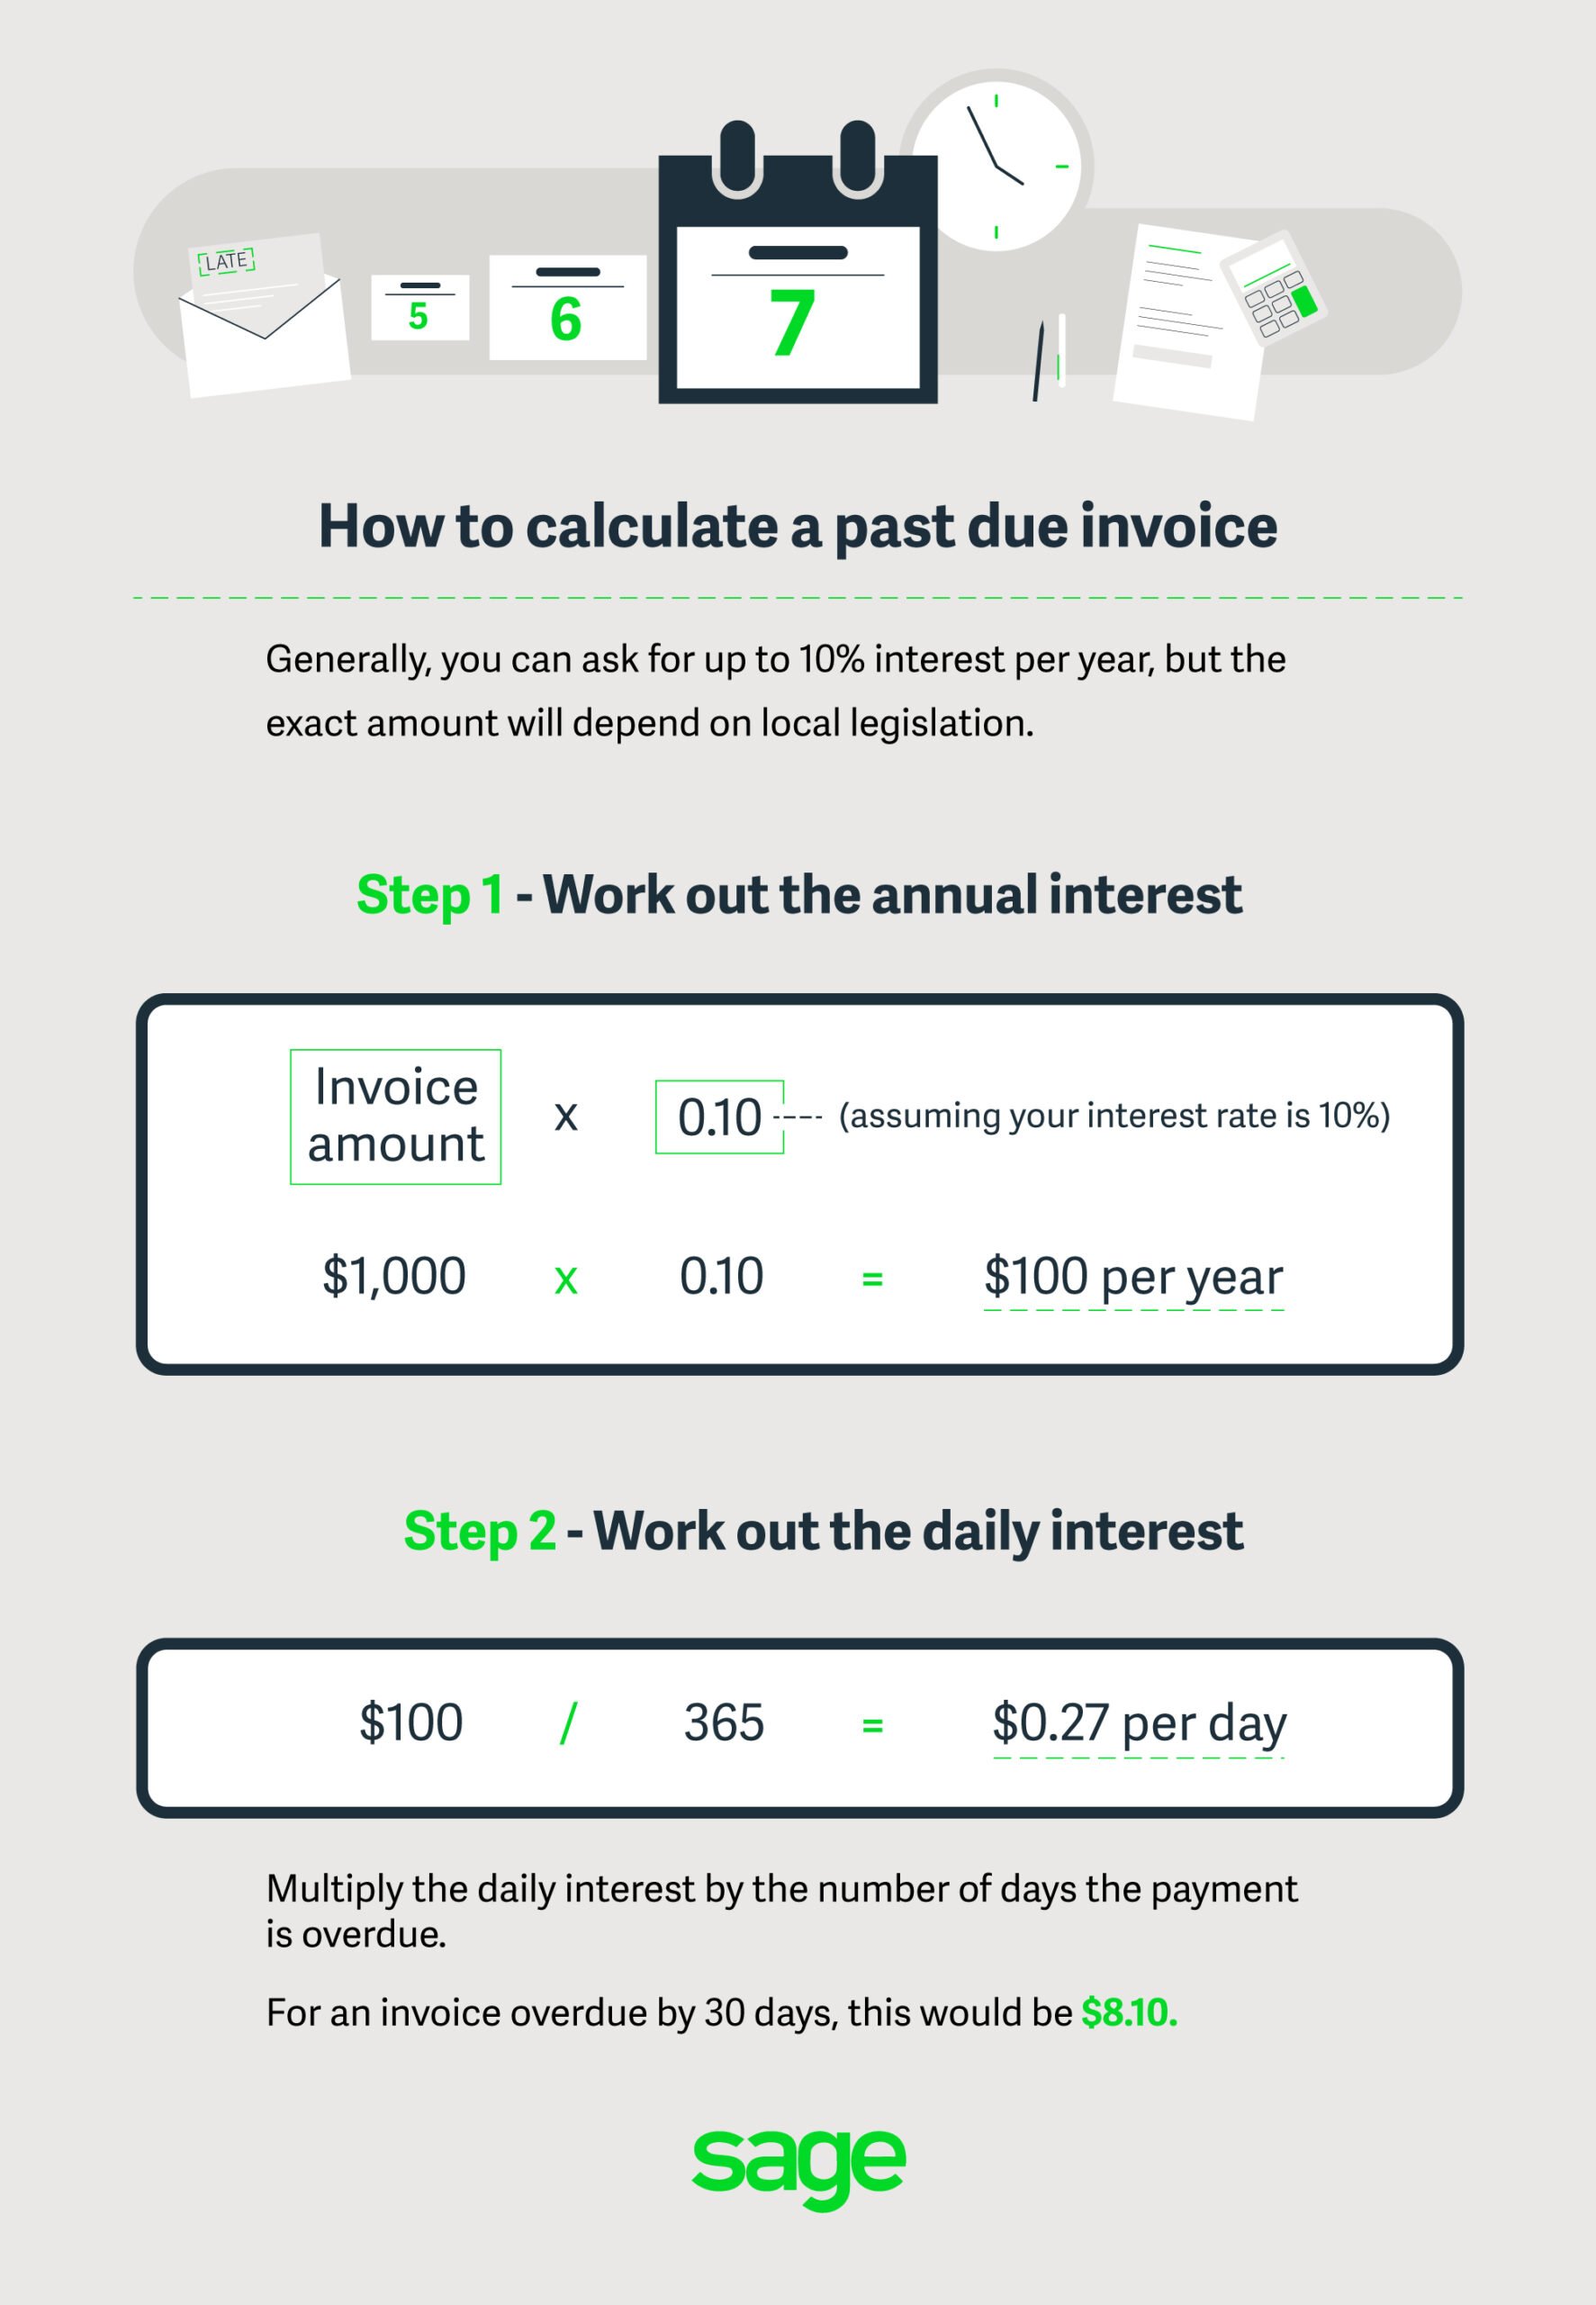 How to calculate a past due invoice steps